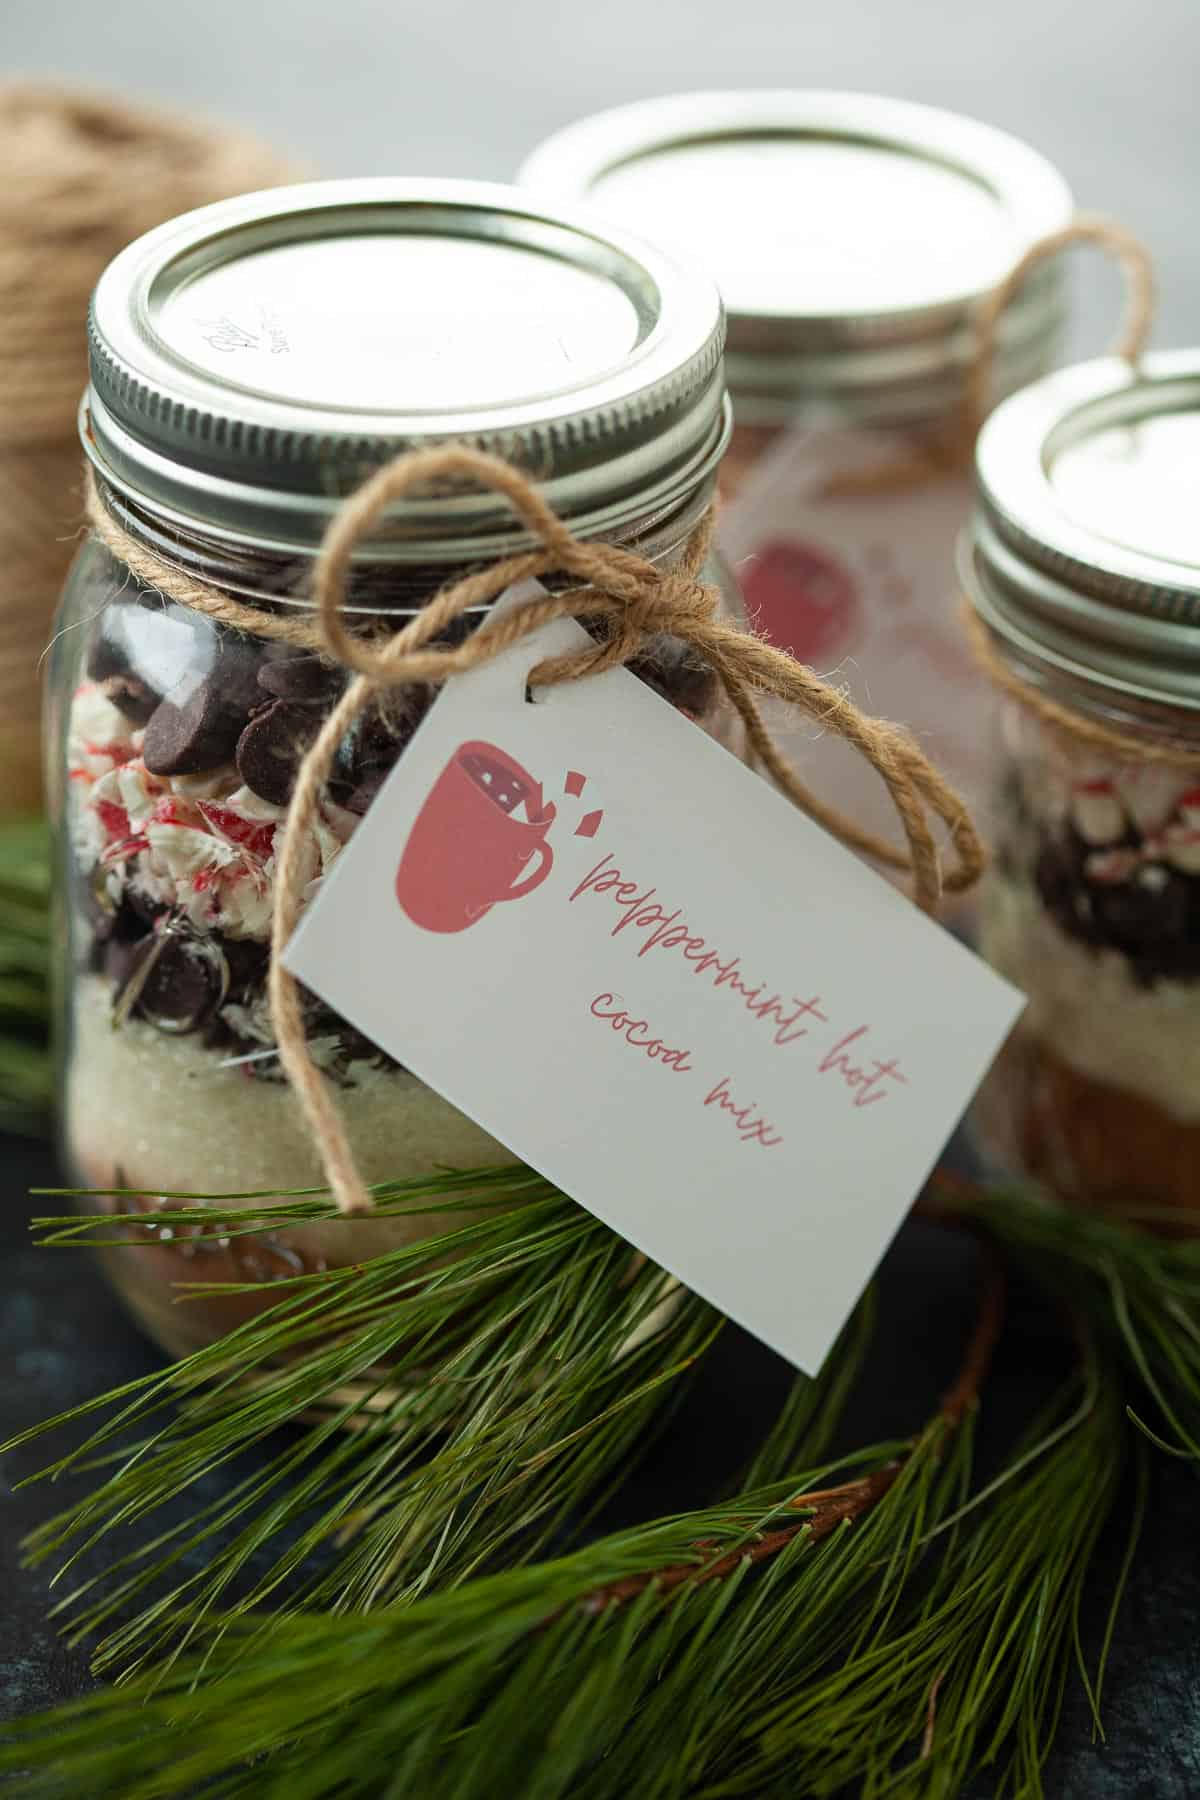 peppermint hot chocolate ingredients in a jar